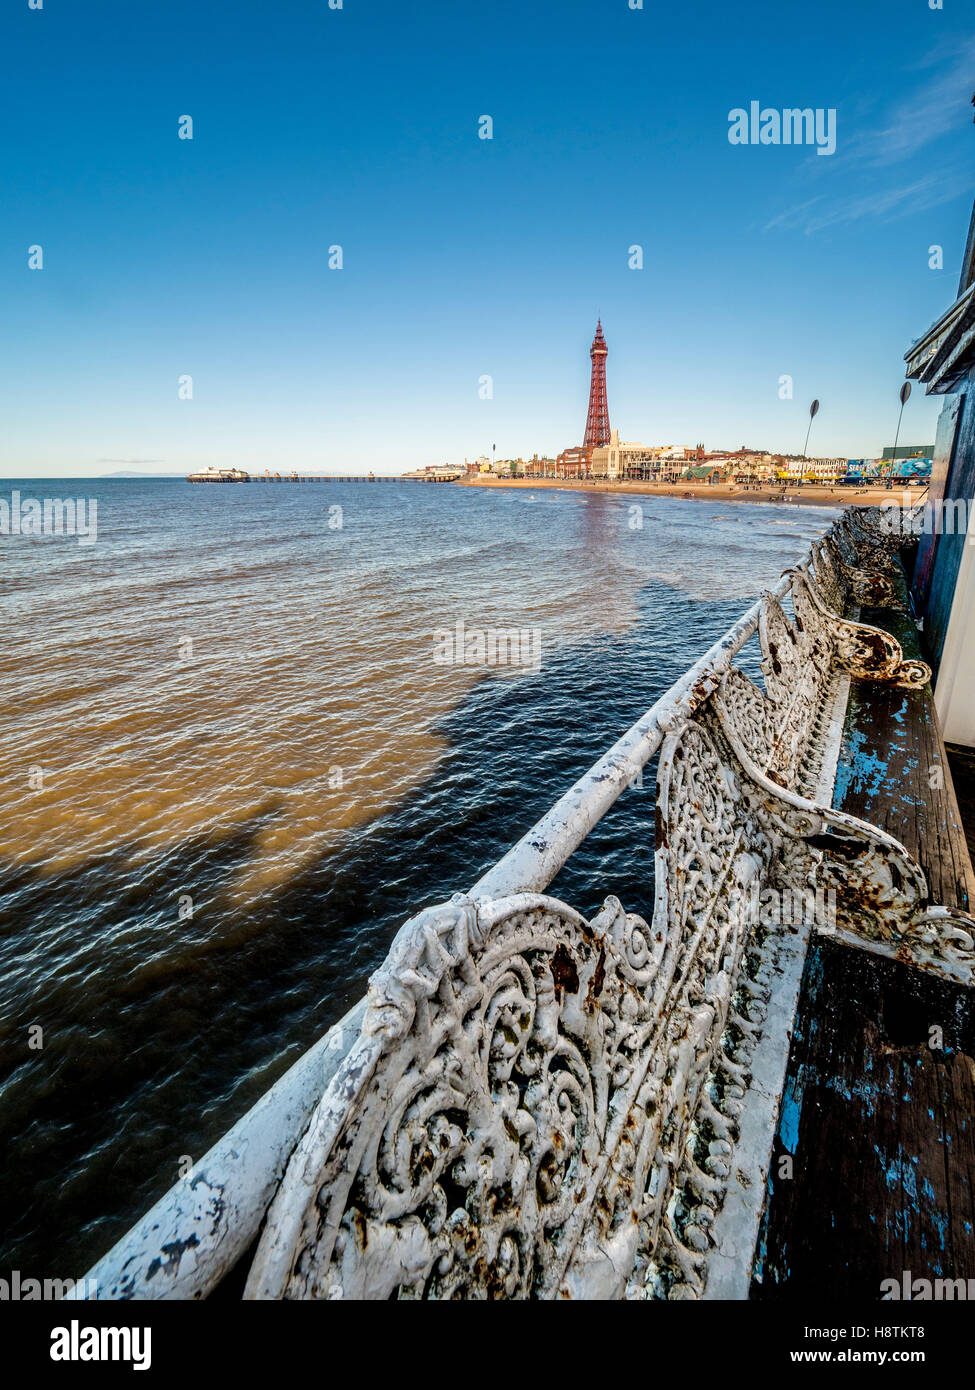 Traditional cast iron seats in a state of disrepair on Pier, with Blackpool Tower in distance, Blackpool, Lancashire, UK. Stock Photo